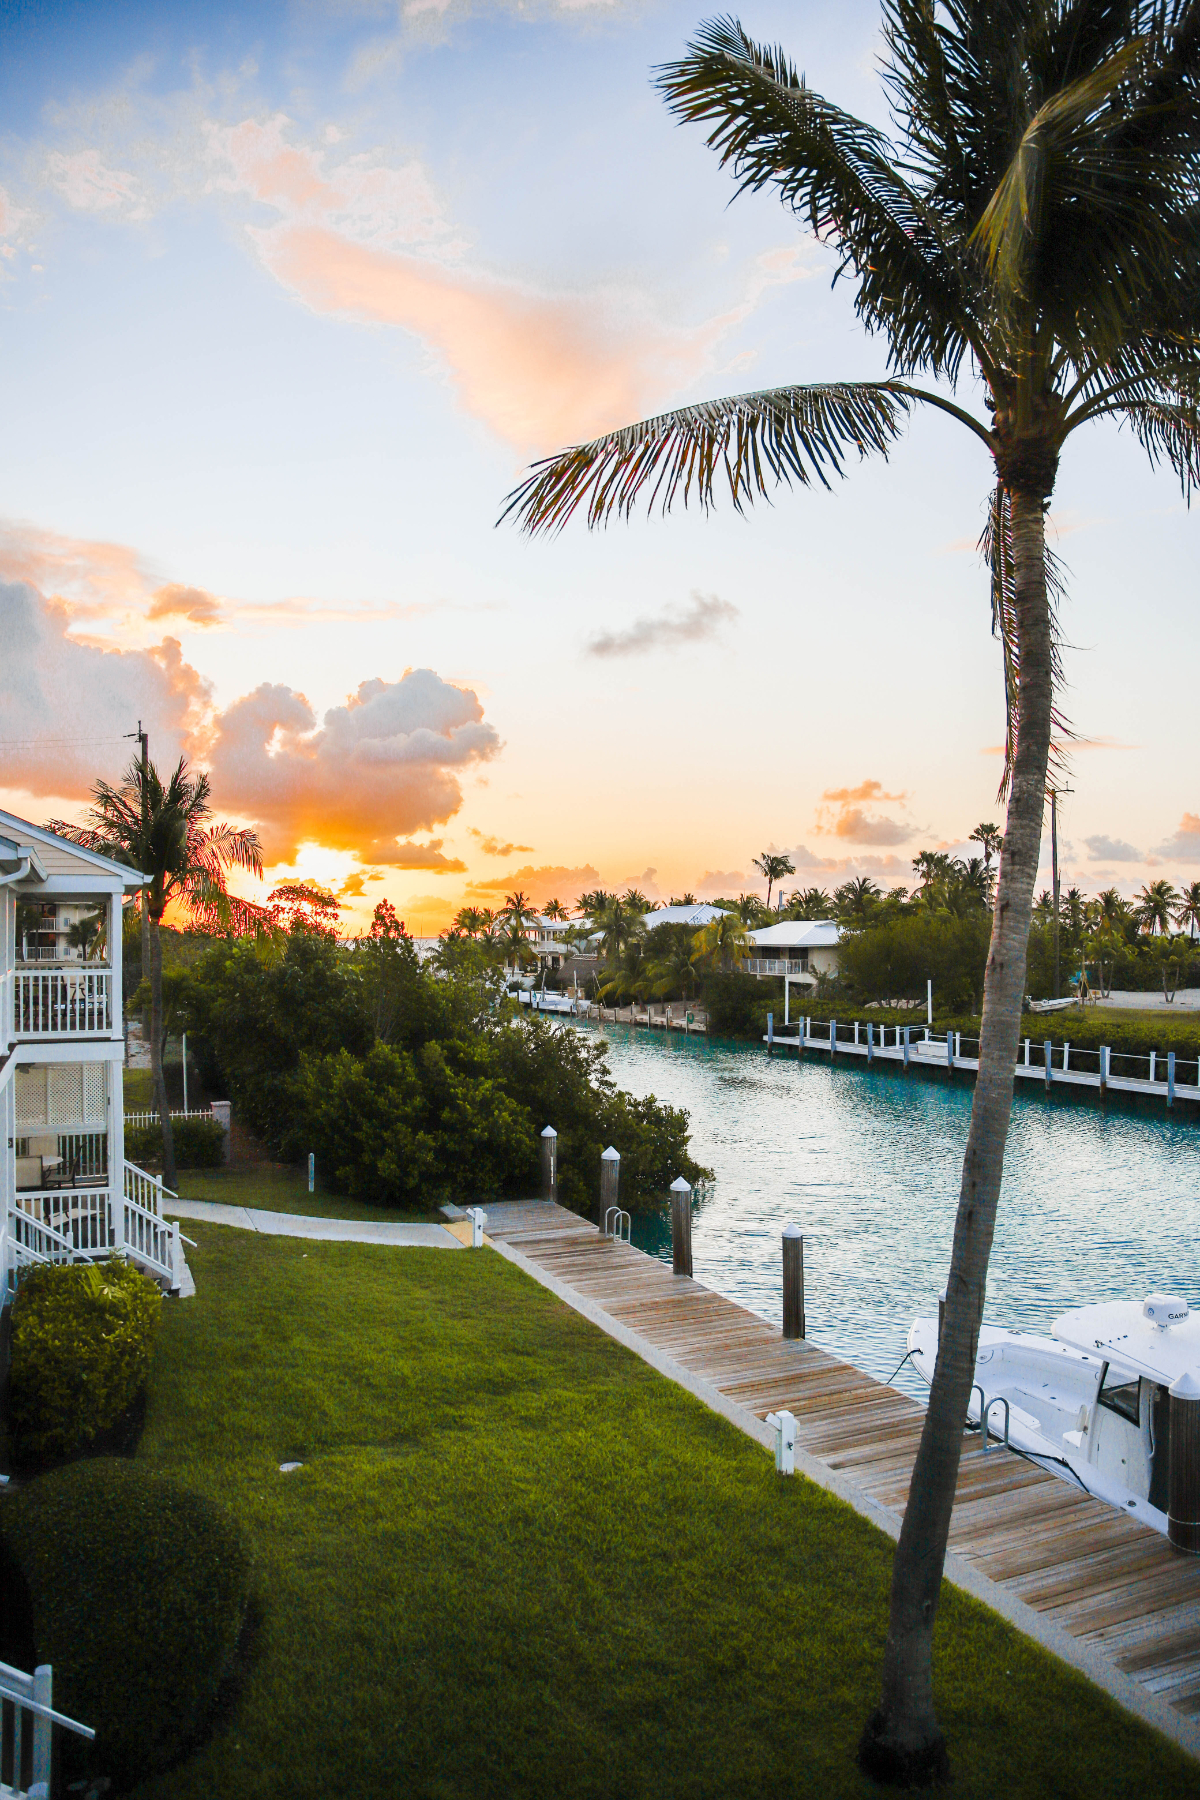 sunrise at Hawks Cay resort showing the bay, grass area, and resort homes